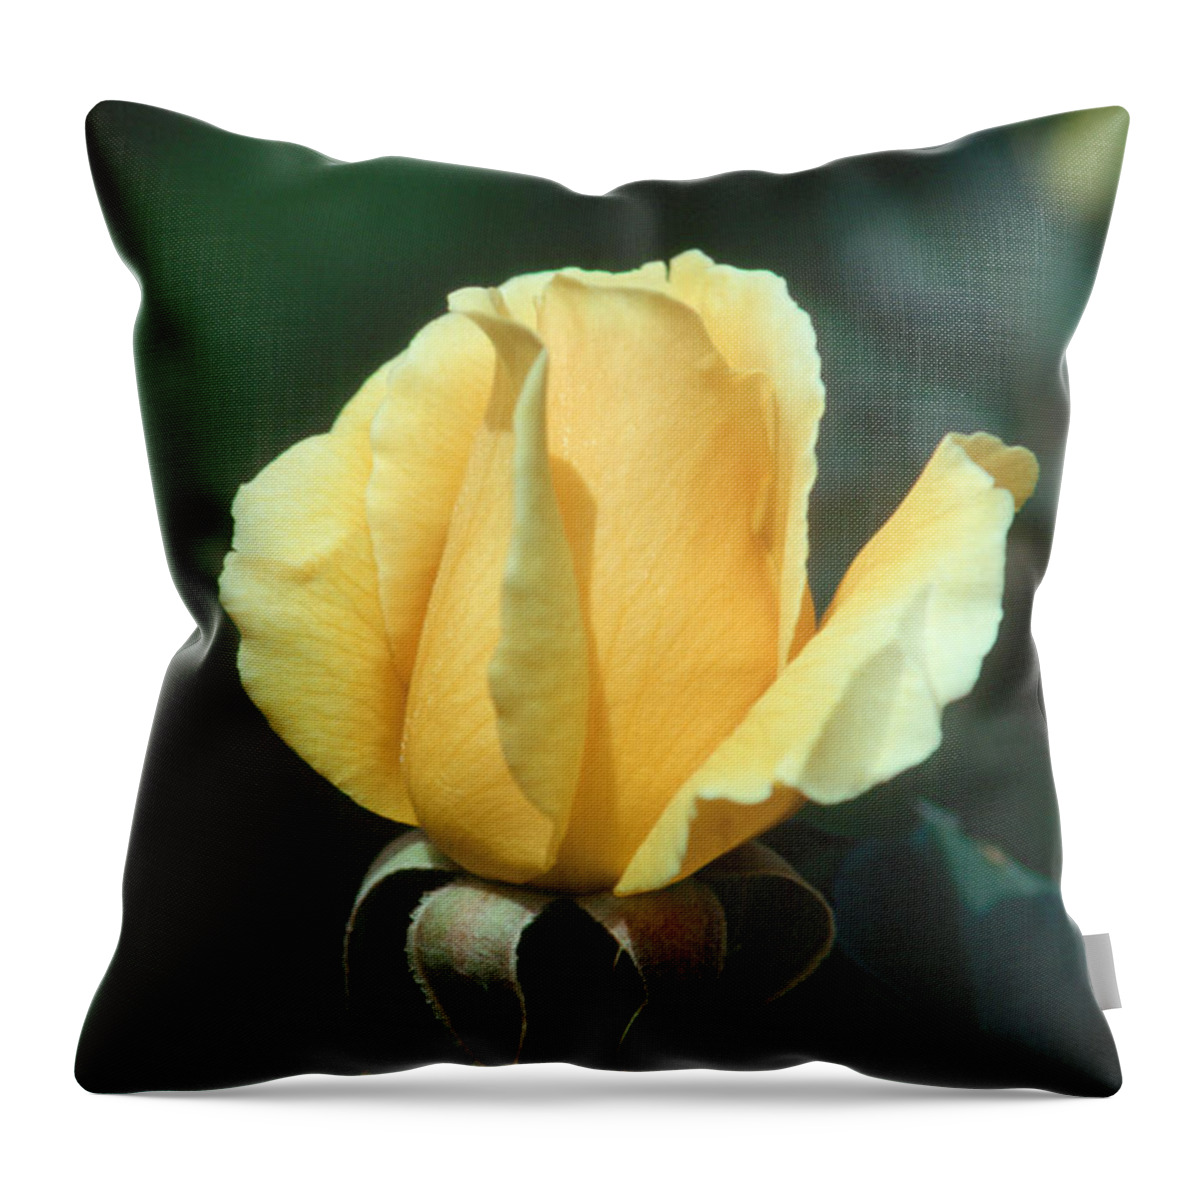 Flower Throw Pillow featuring the photograph Rose 2 by Andy Shomock